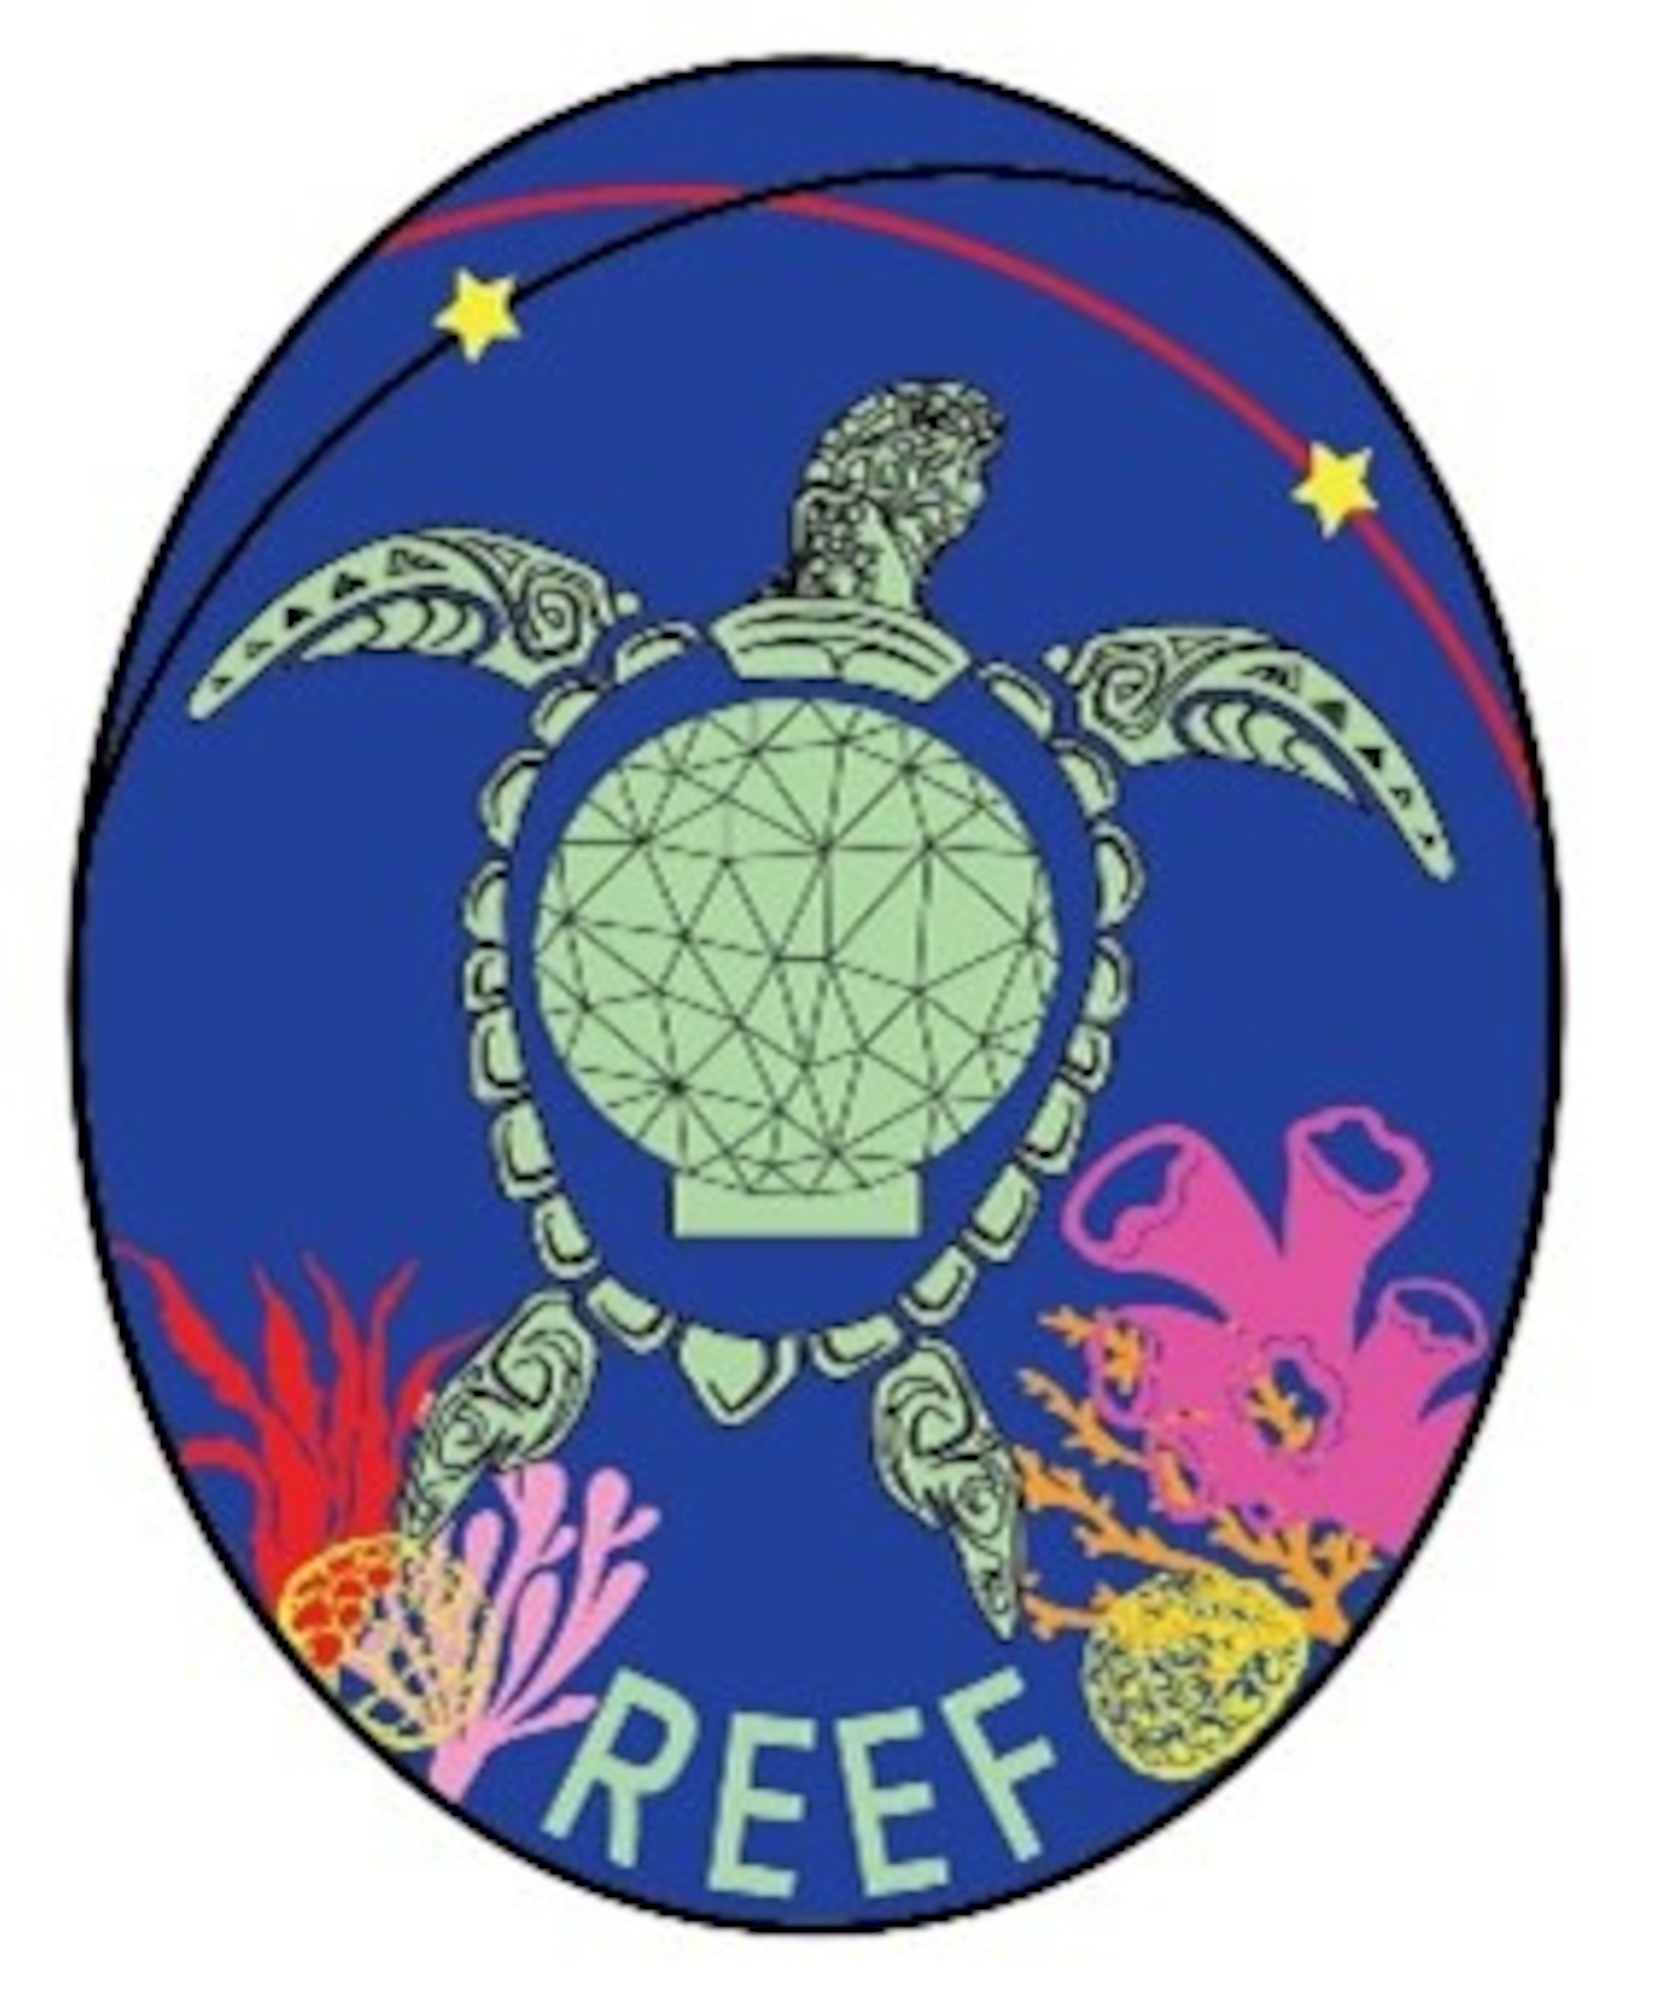 Oval logo with sea turtle with shell that resembles a radome and word "reef" at the bottom.